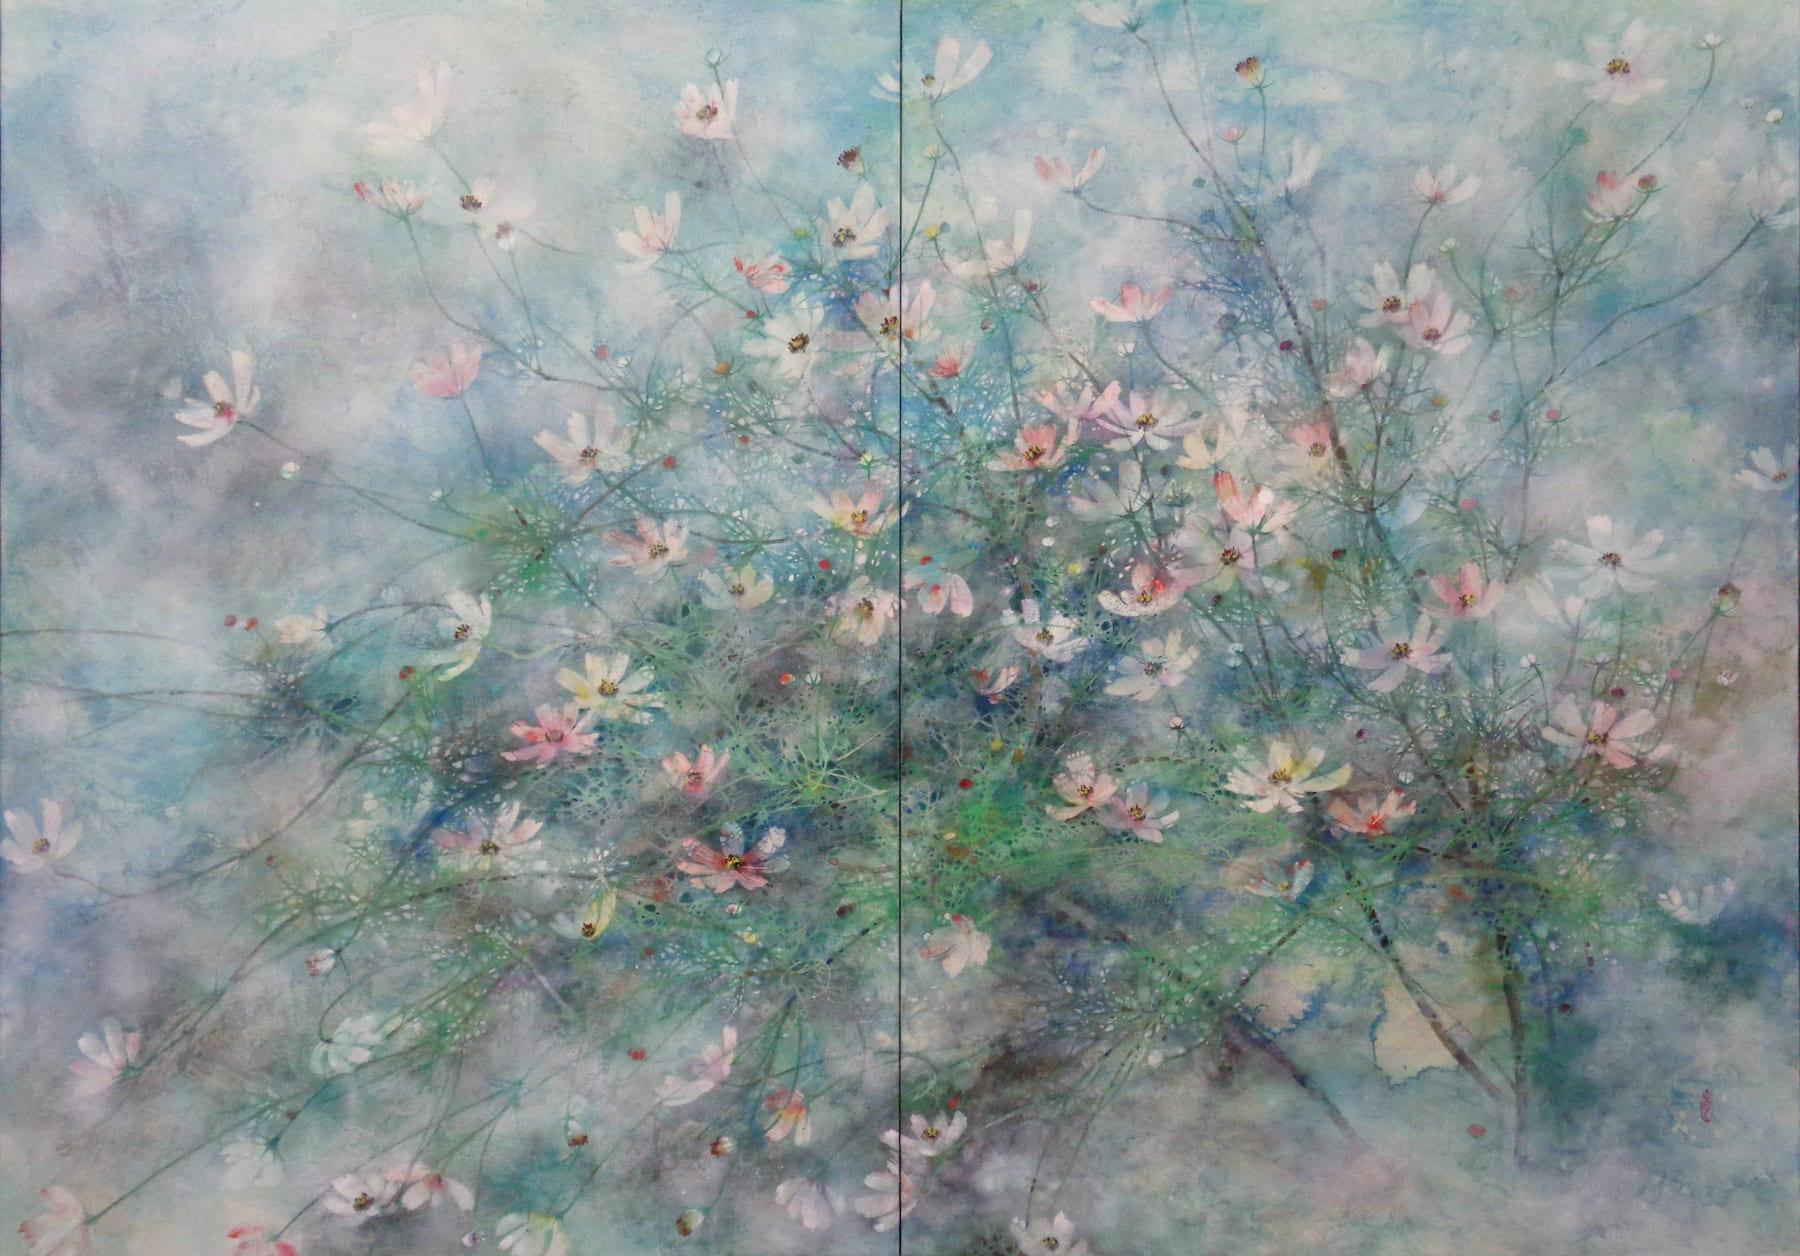 Yiching Chen Landscape Painting - Hope by CHEN Yiching (Cosmos series) - Contemporary Nihonga (Japanese Painting)